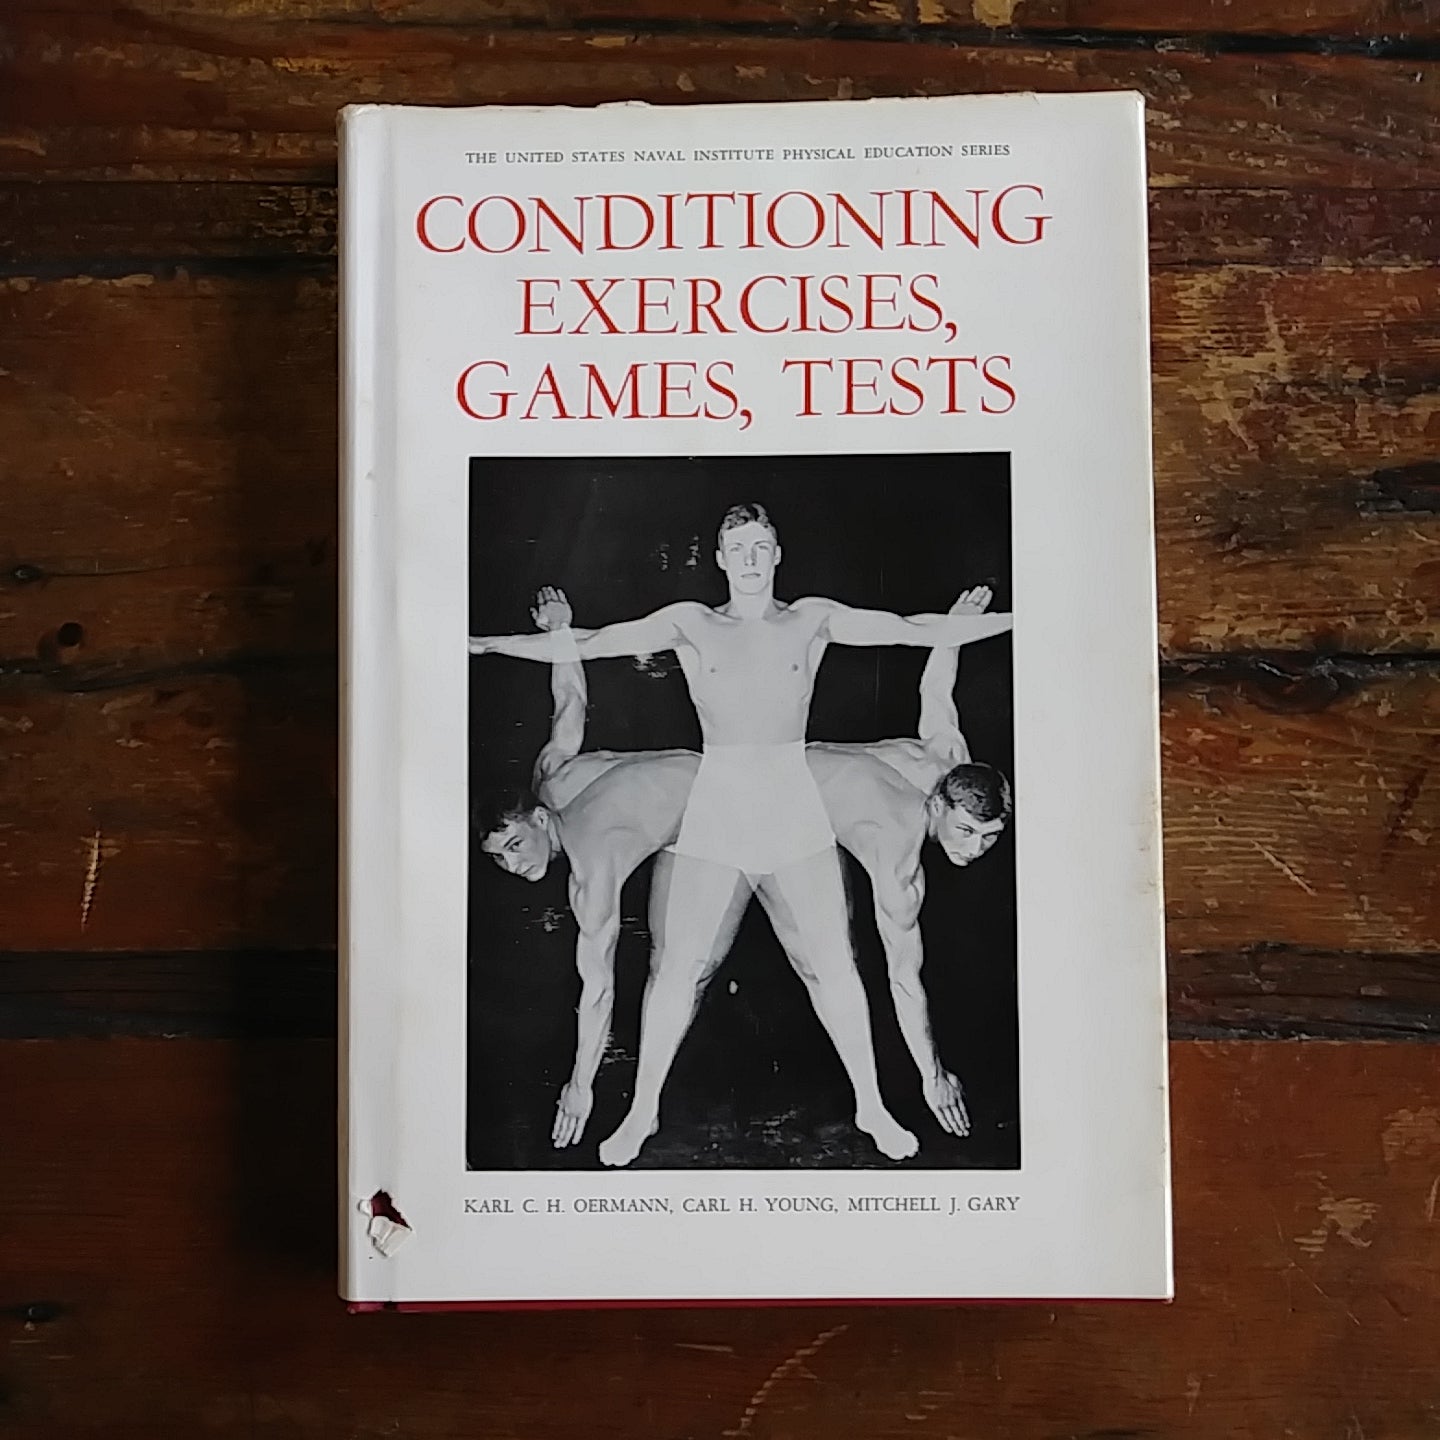 Book,"The United States Naval Institute PE Series - Conditioning Exercises, Games, Tests"